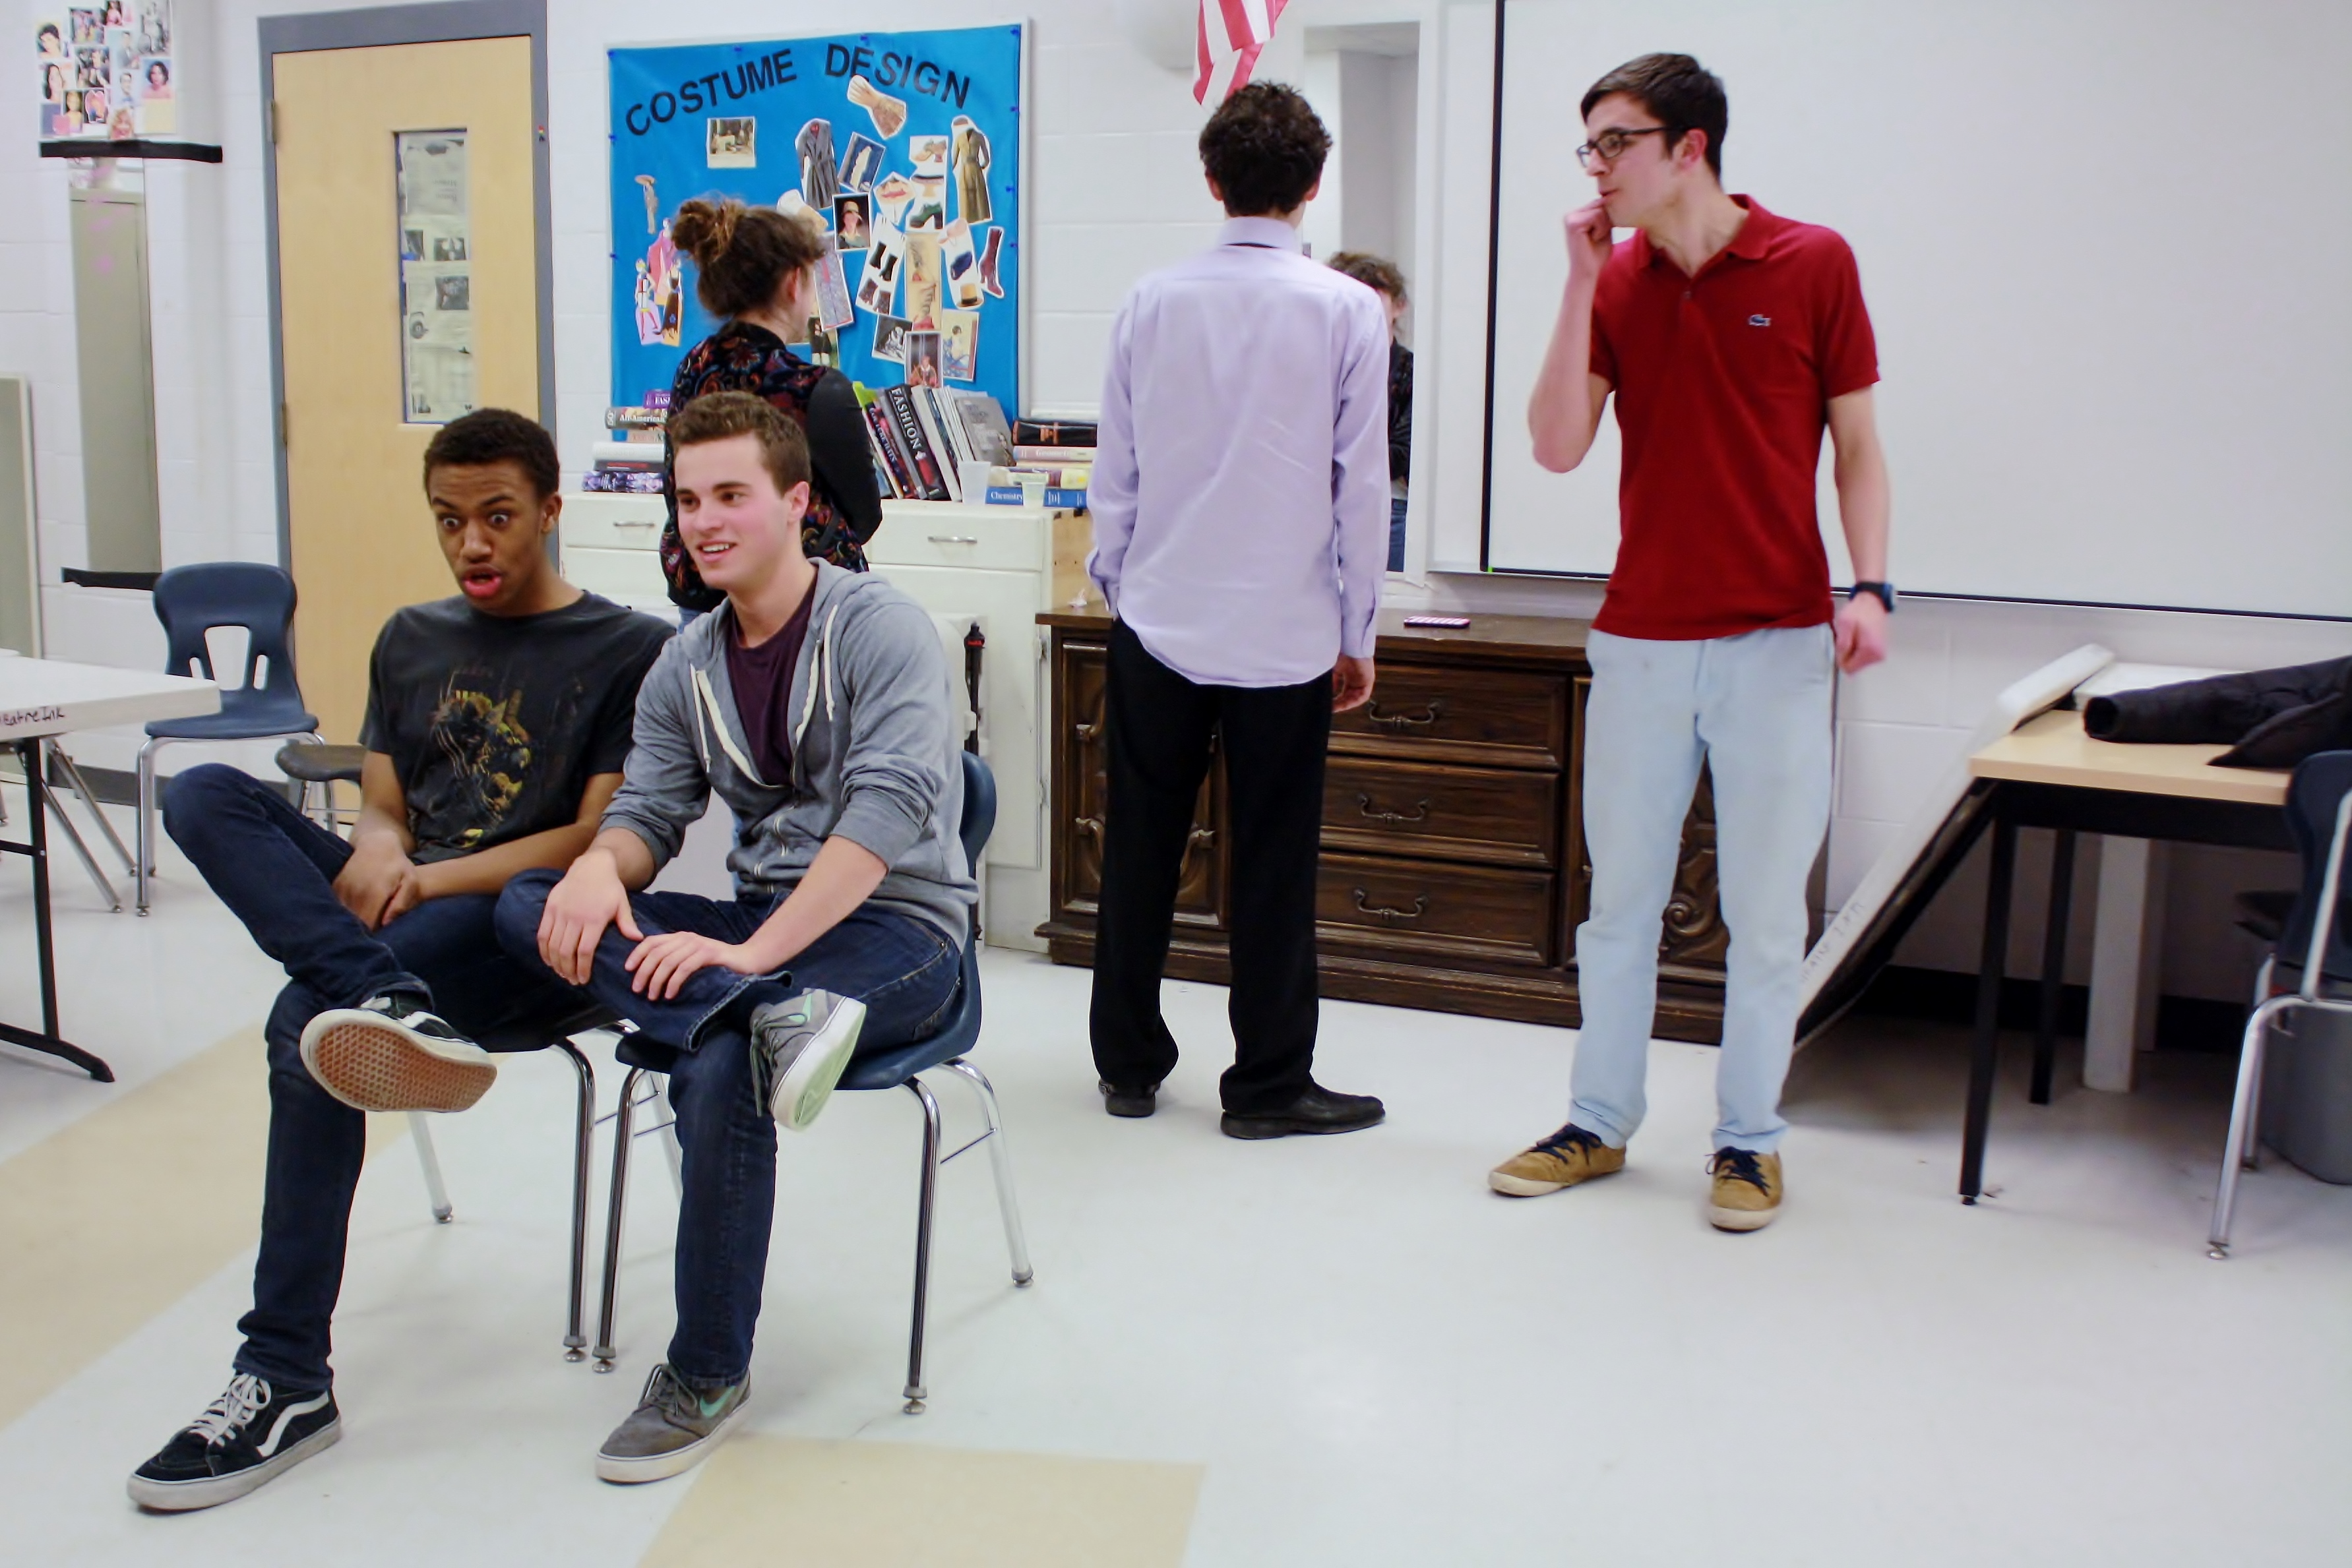 The cast of Spontaneous Generation rehearses one of its improvisational games. Photo by Devin Perlo.